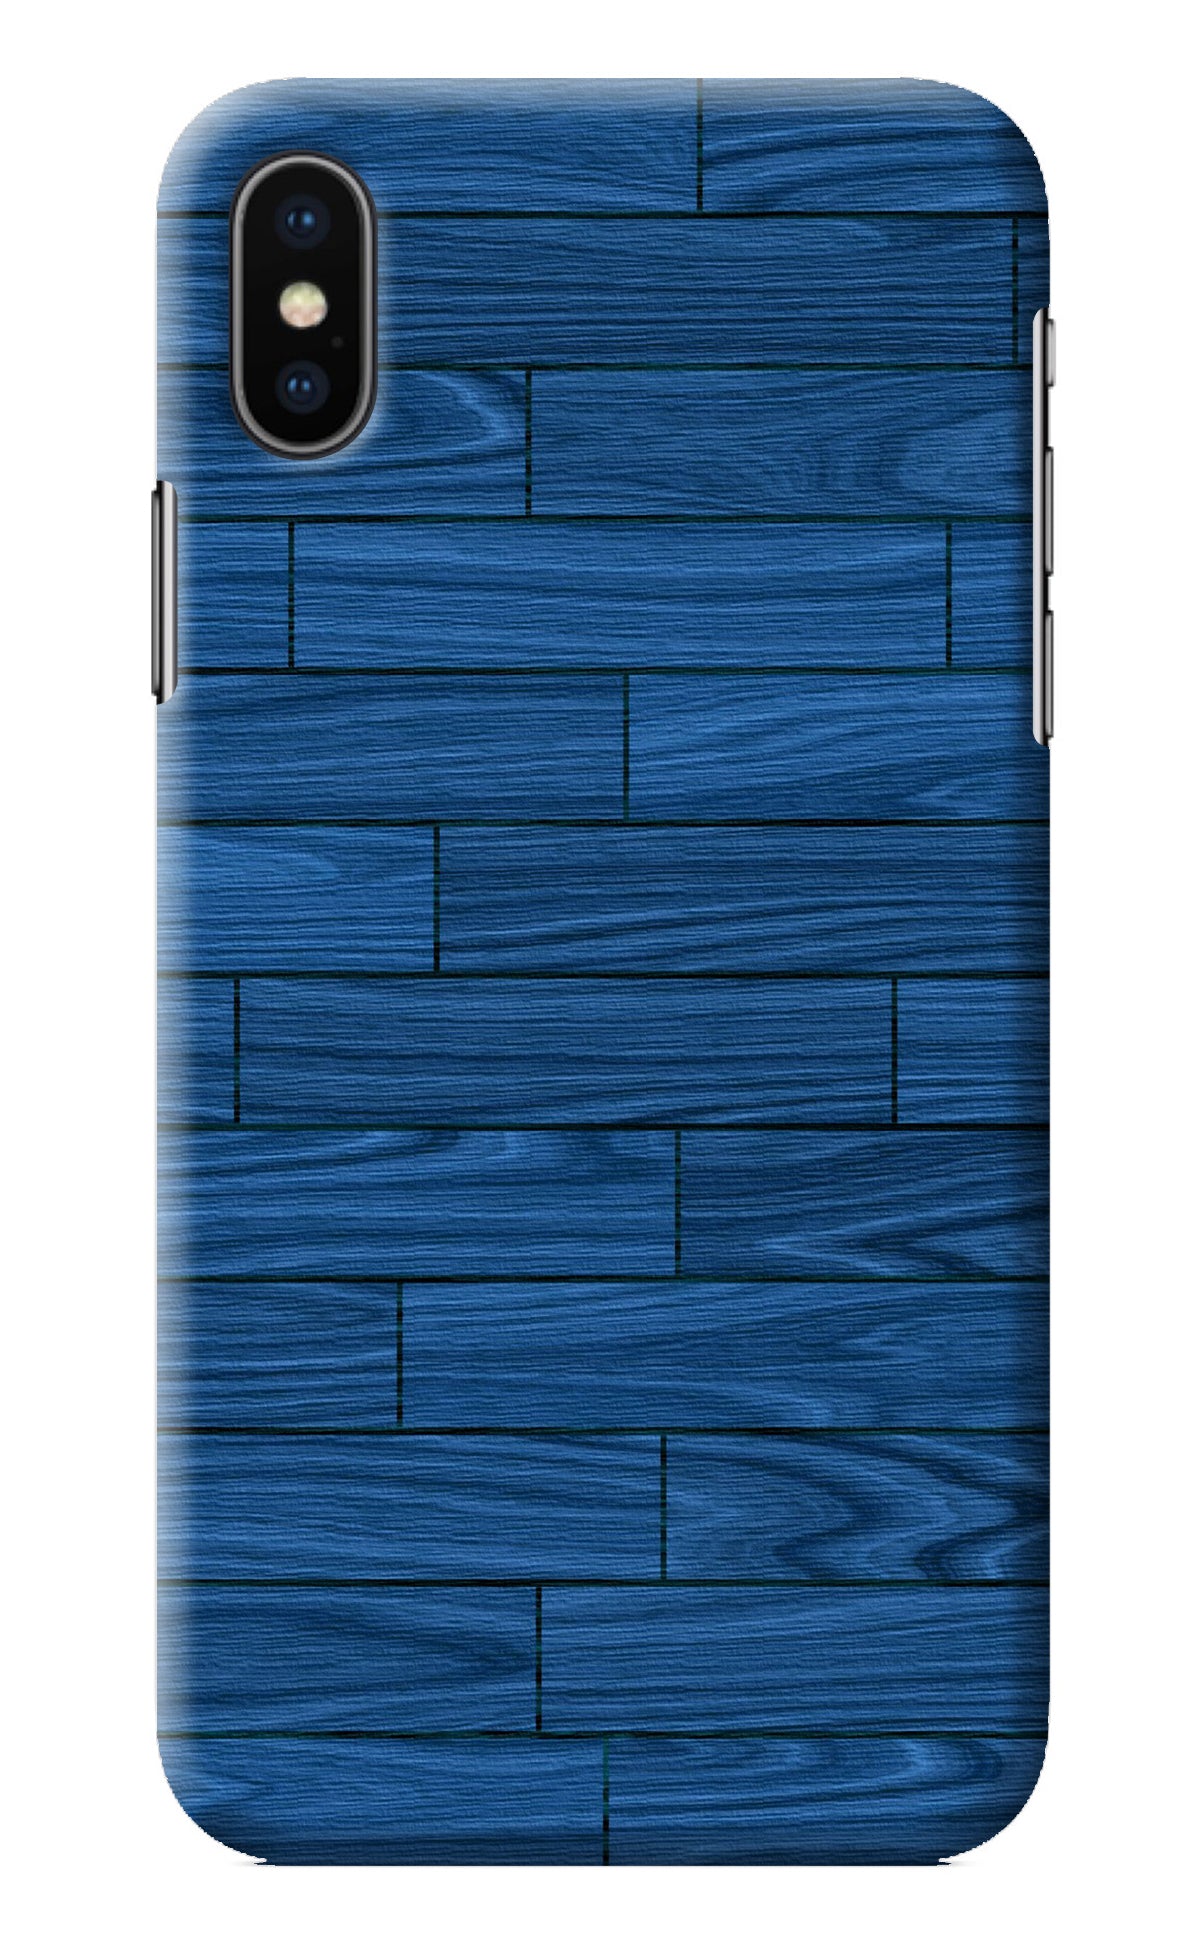 Wooden Texture iPhone X Back Cover